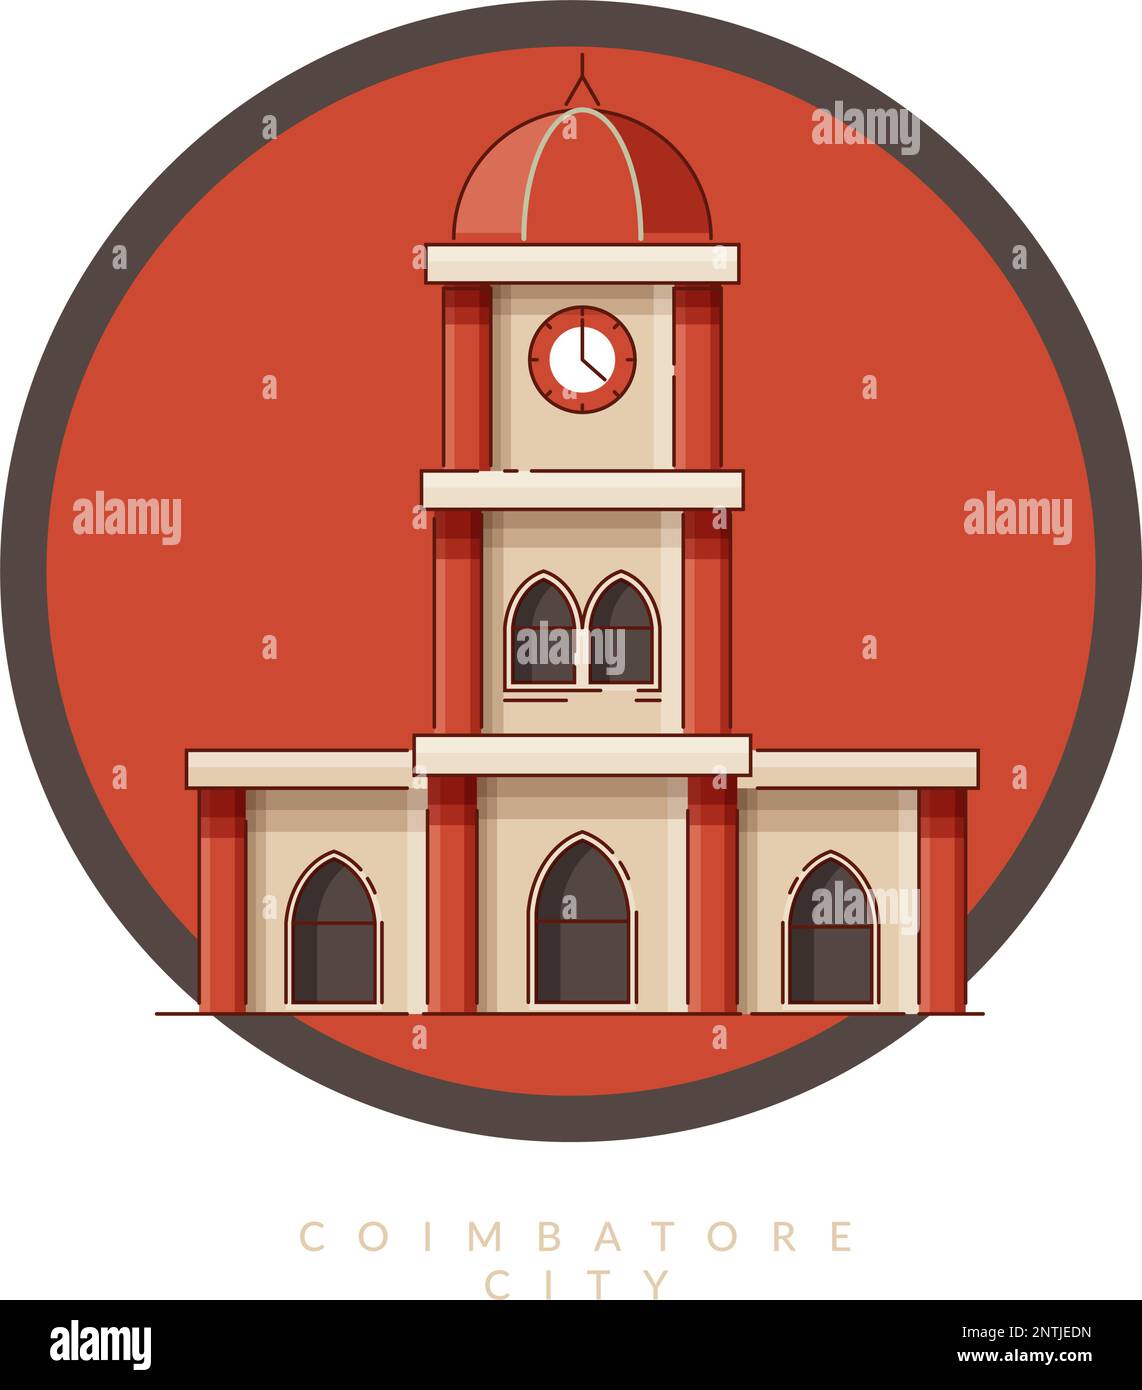 coimbatore city clock tower icon illustration as eps 10 file 2NTJEDN